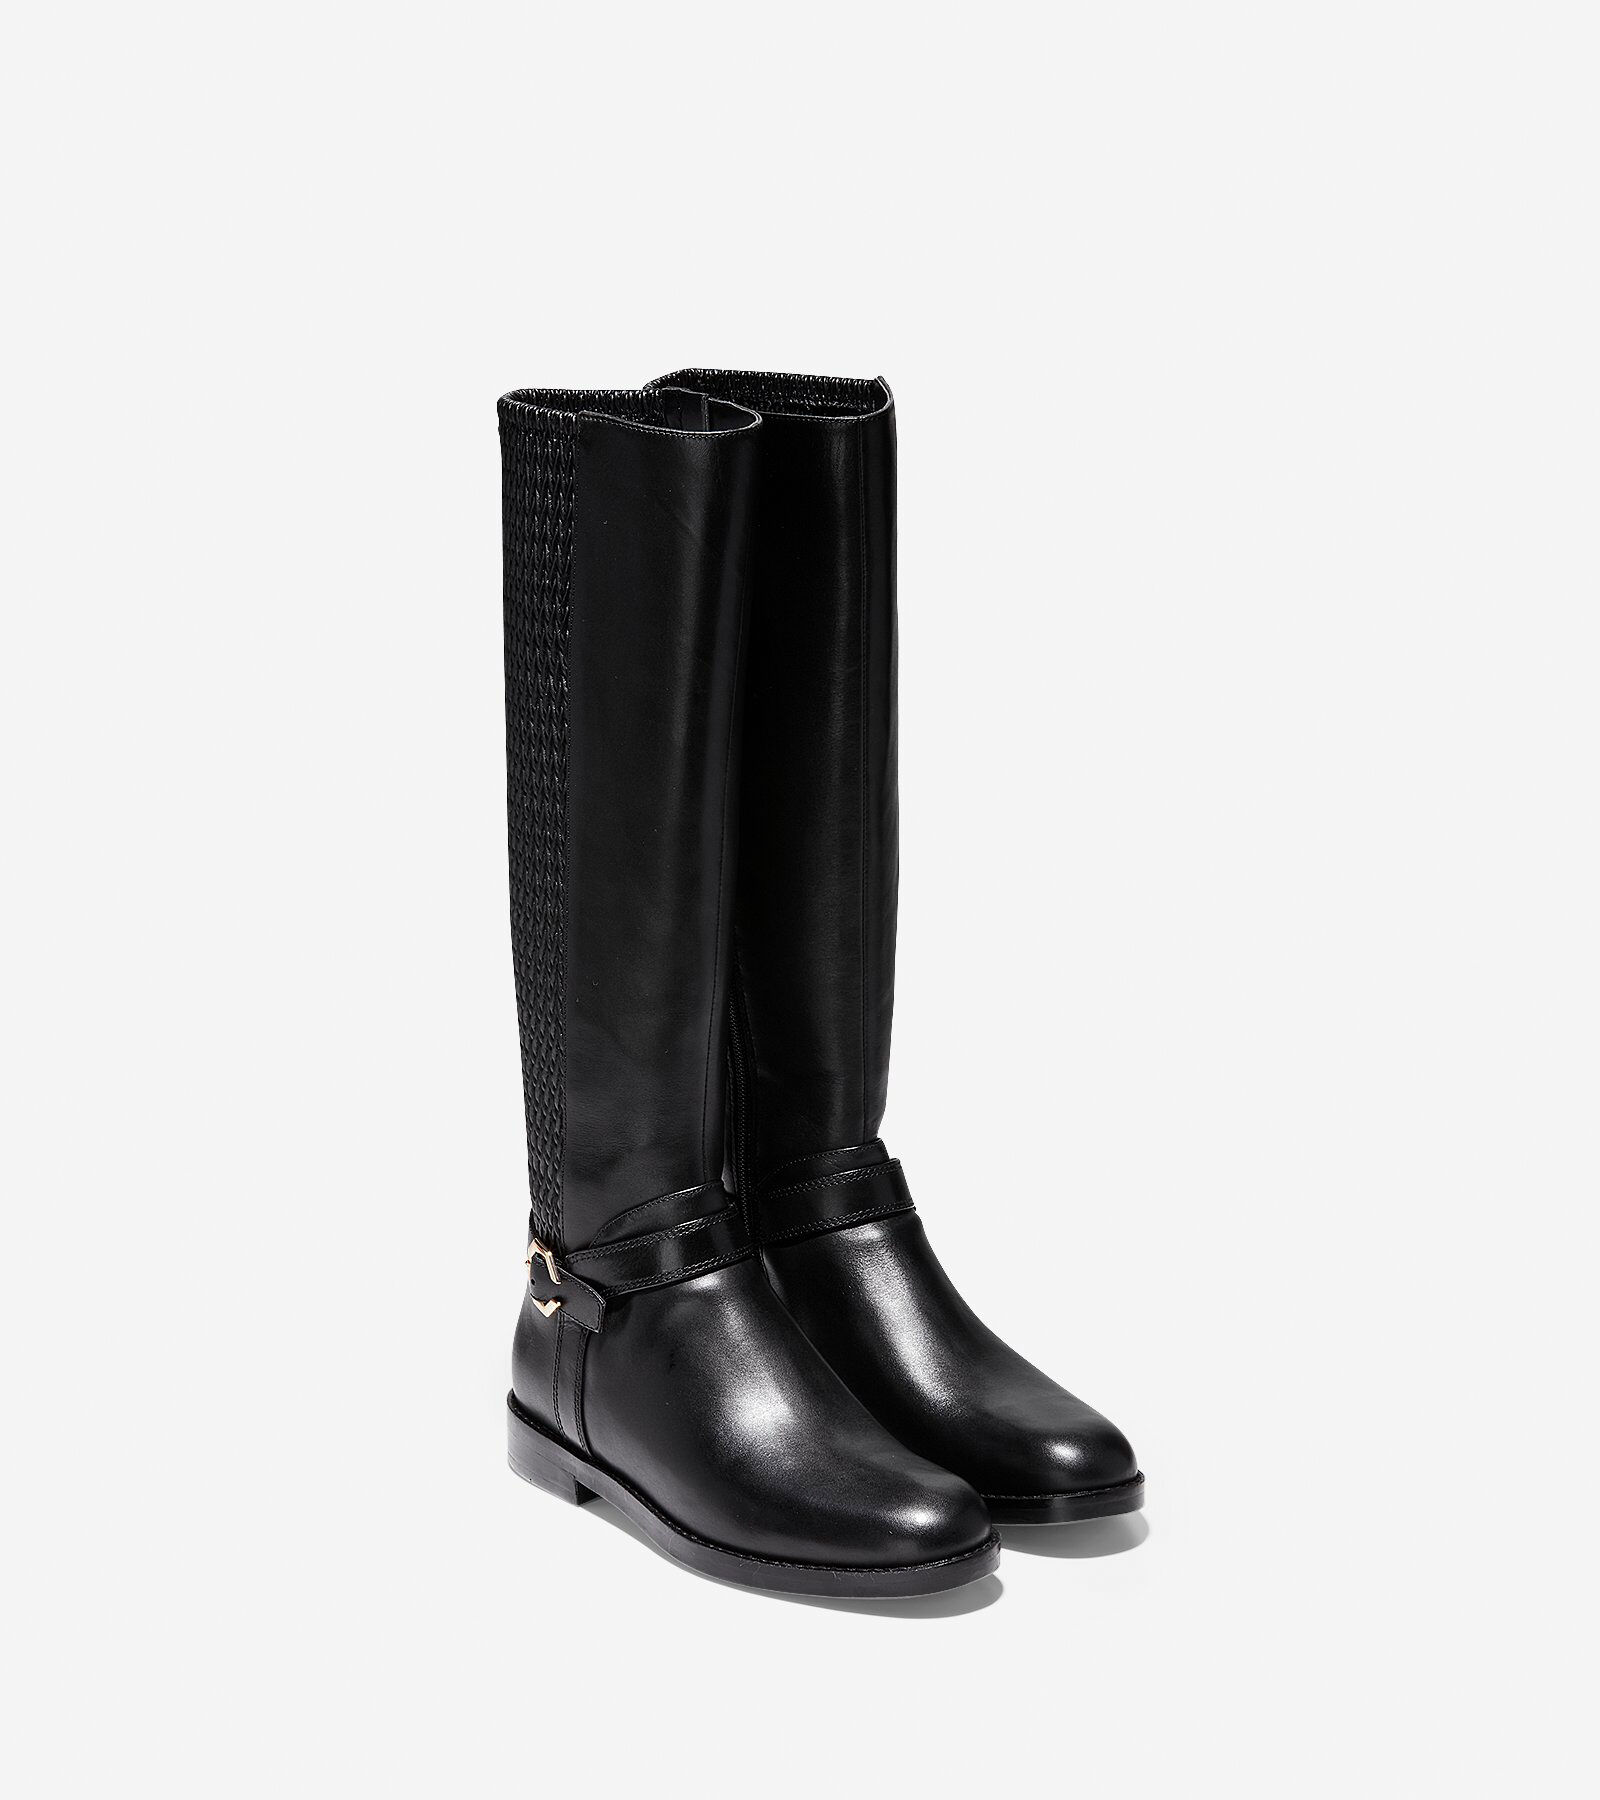 cole haan leela grand 360 riding boots